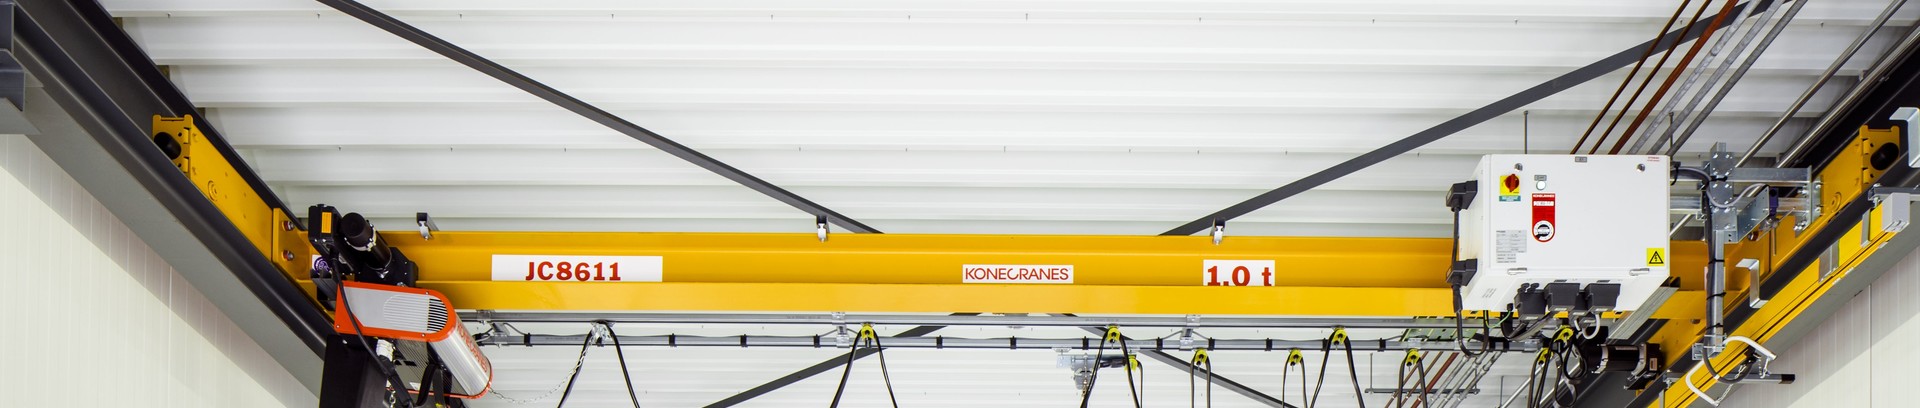 Need Overhead Cranes in Ghana? We do Sales, Service & Spares